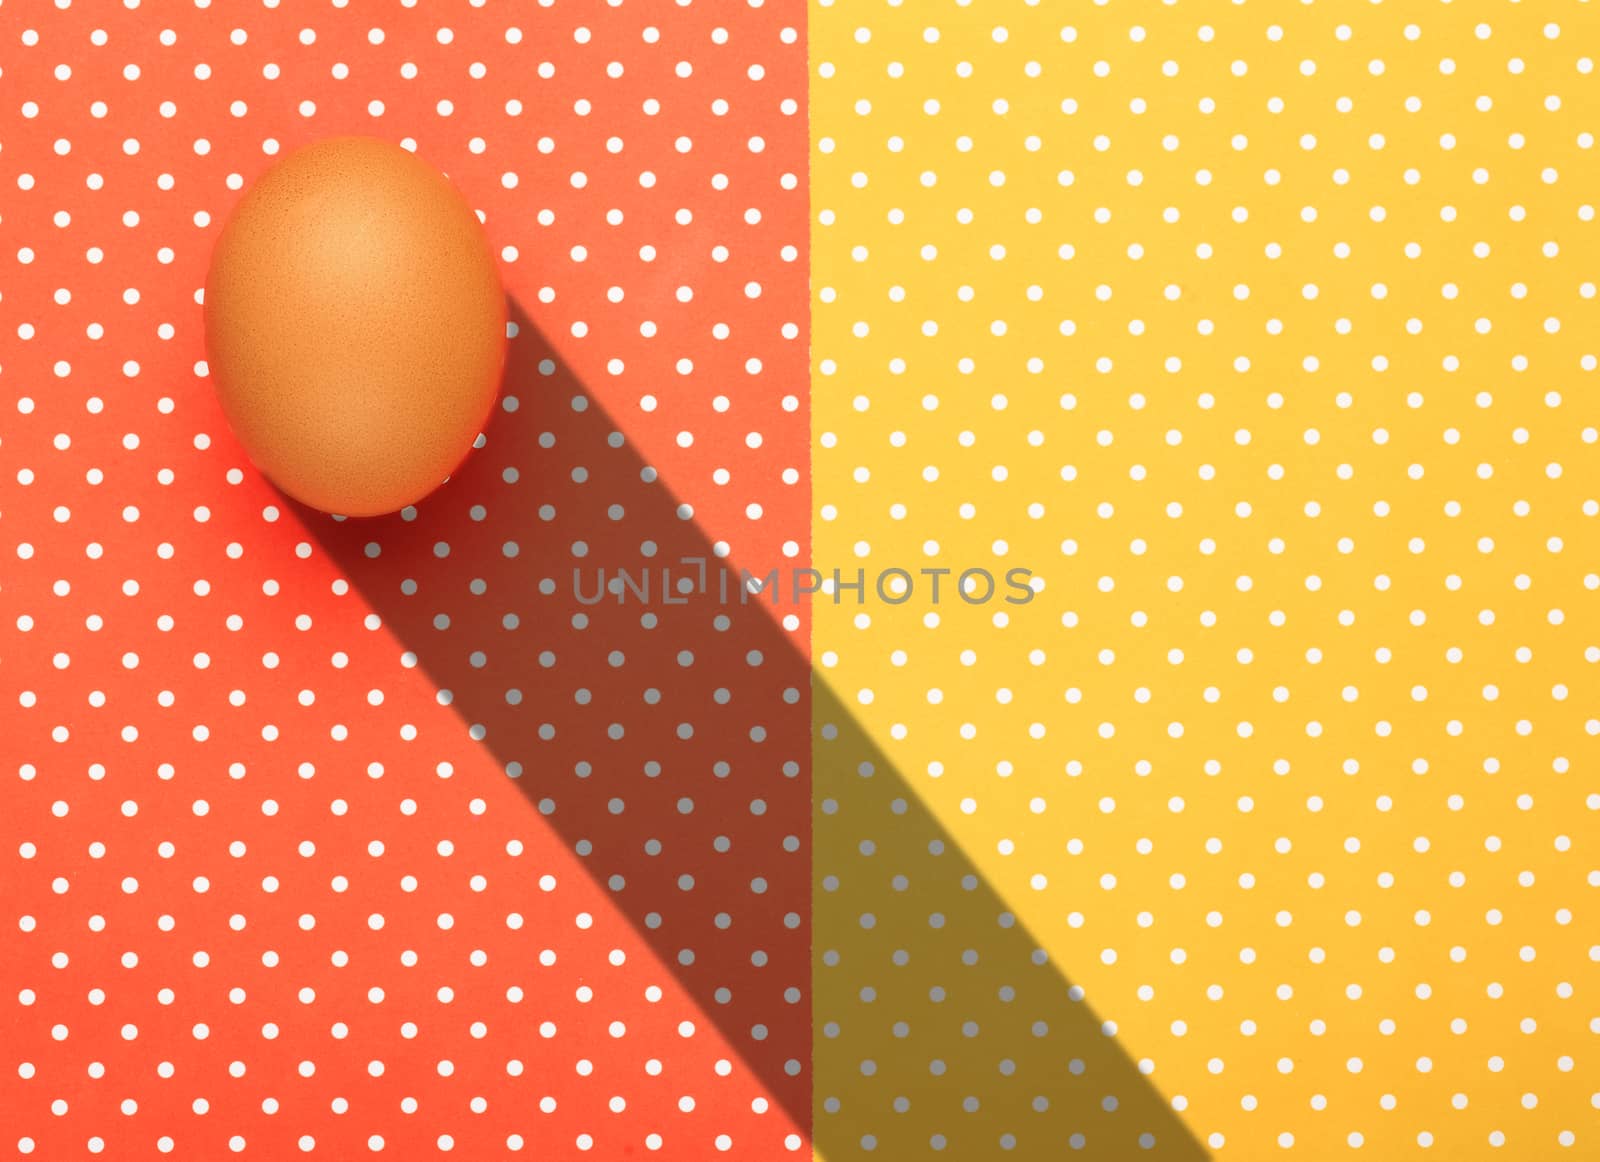 Eggs with colorful topped background by nachrc2001